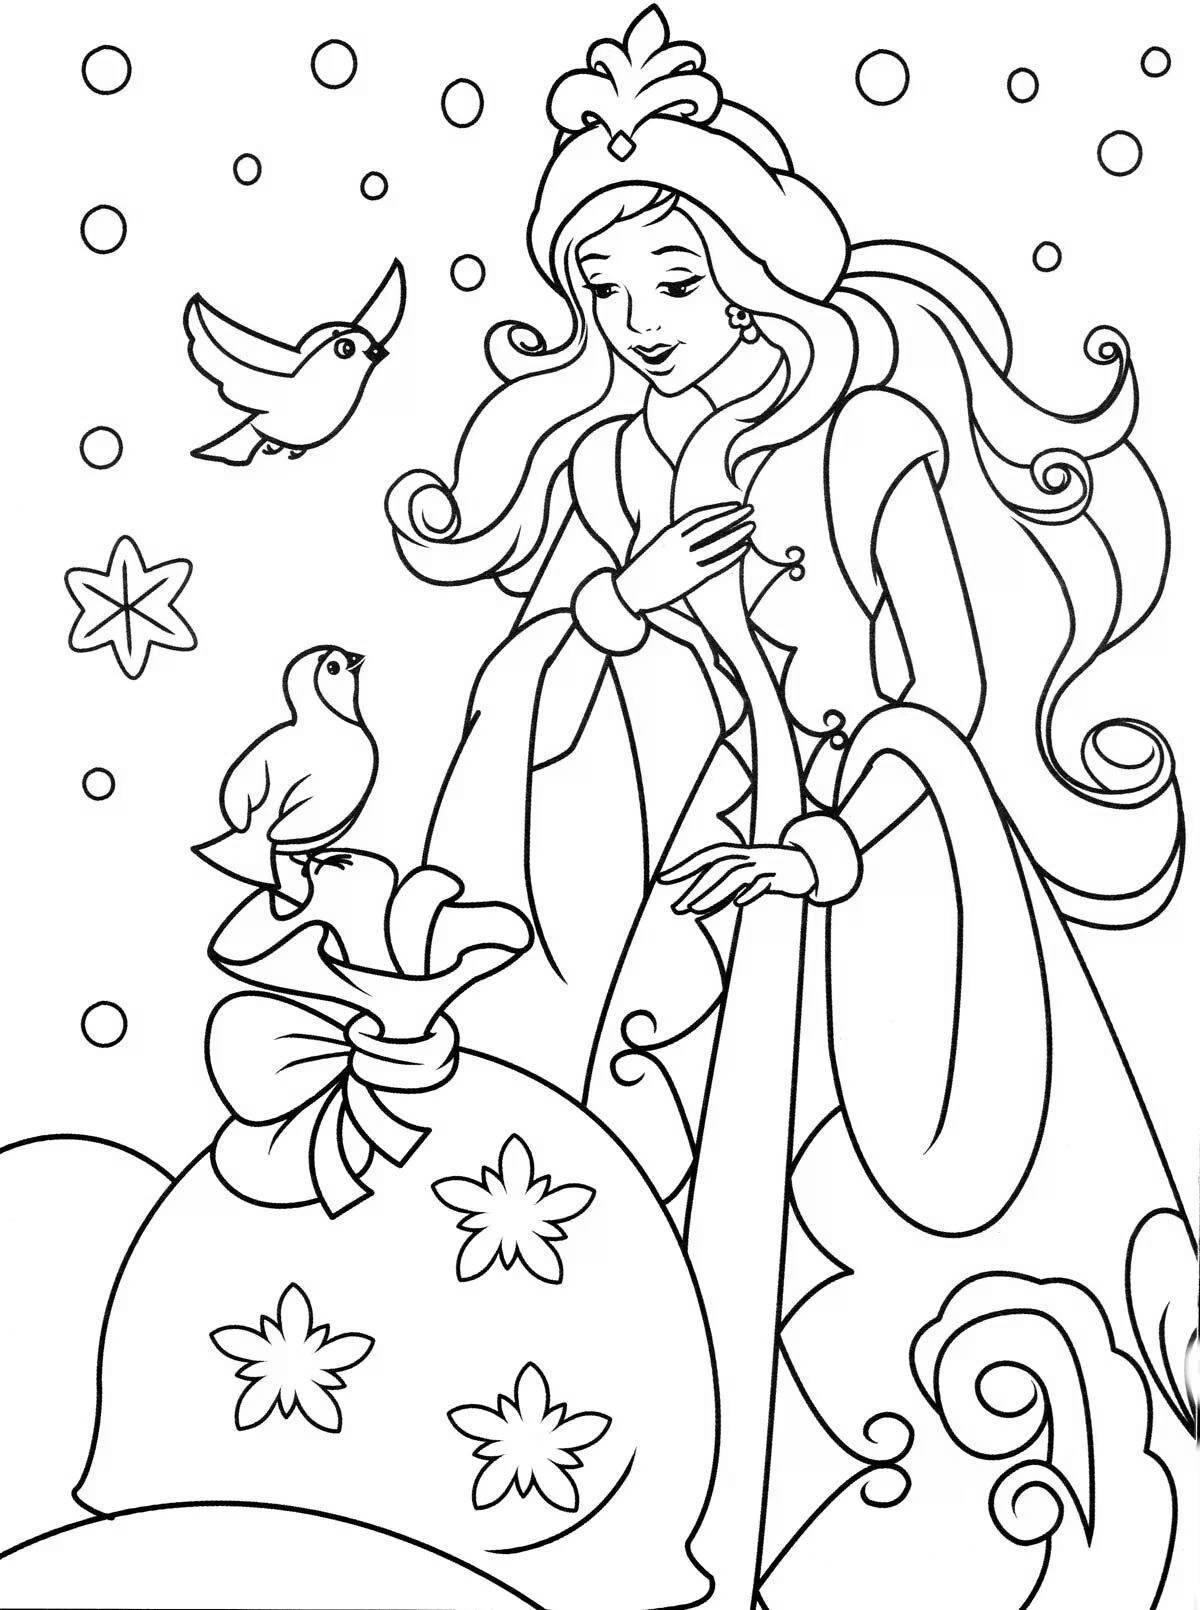 Serene winter coloring book for girls